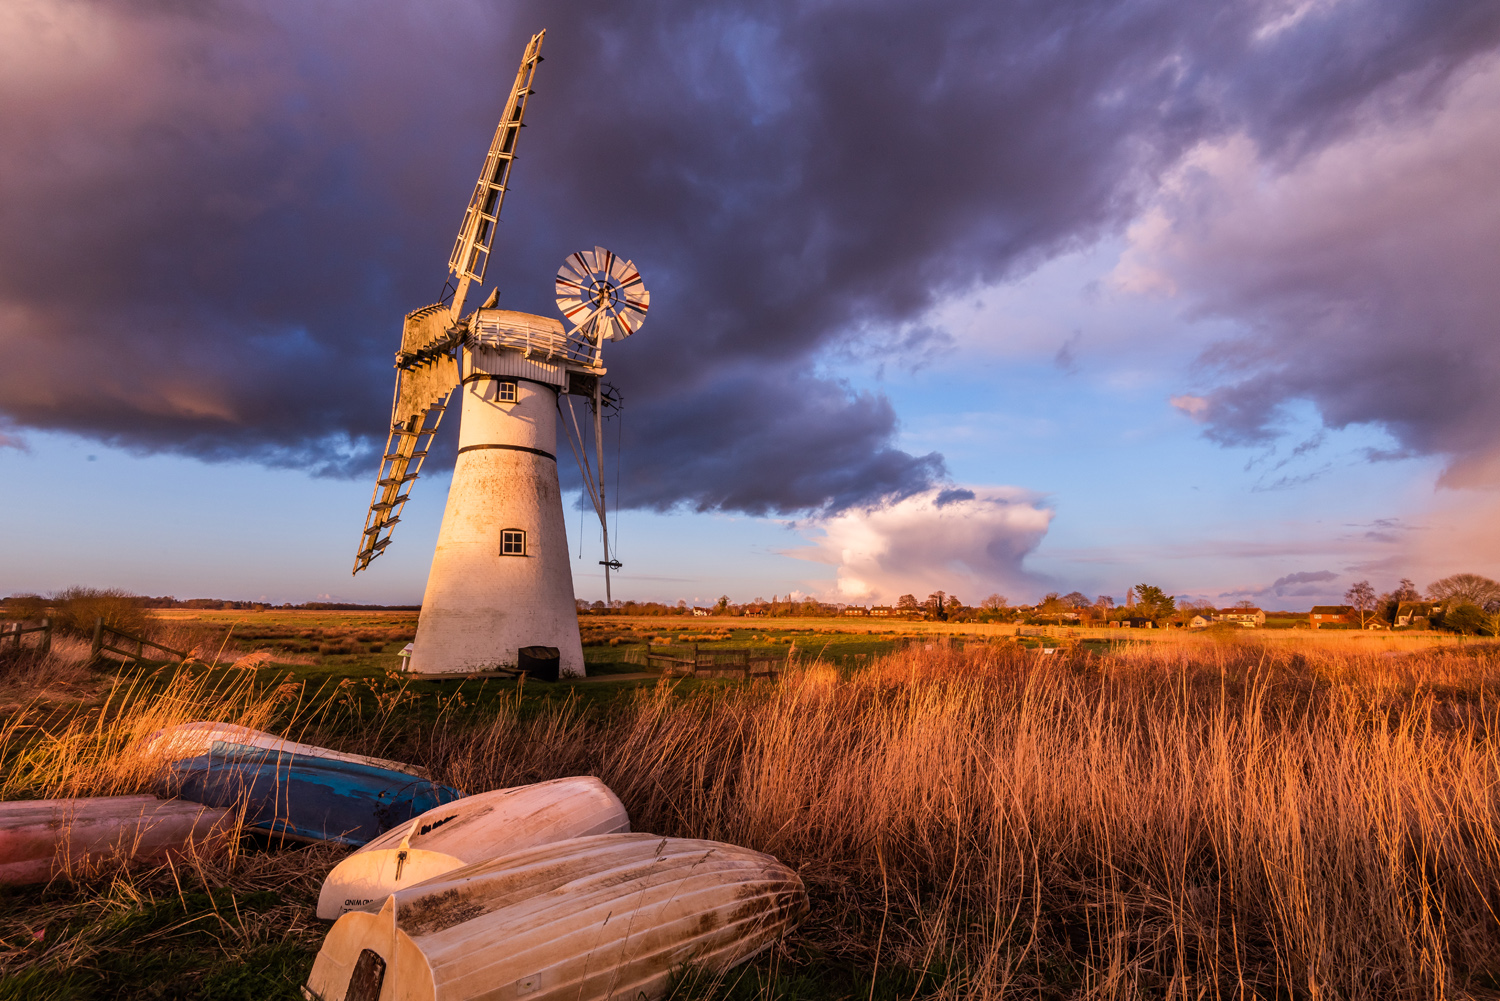 Thurne Mill during a stormy golden hour, with golden reeds and an upturned boat in the foreground, by Visit the Broads 